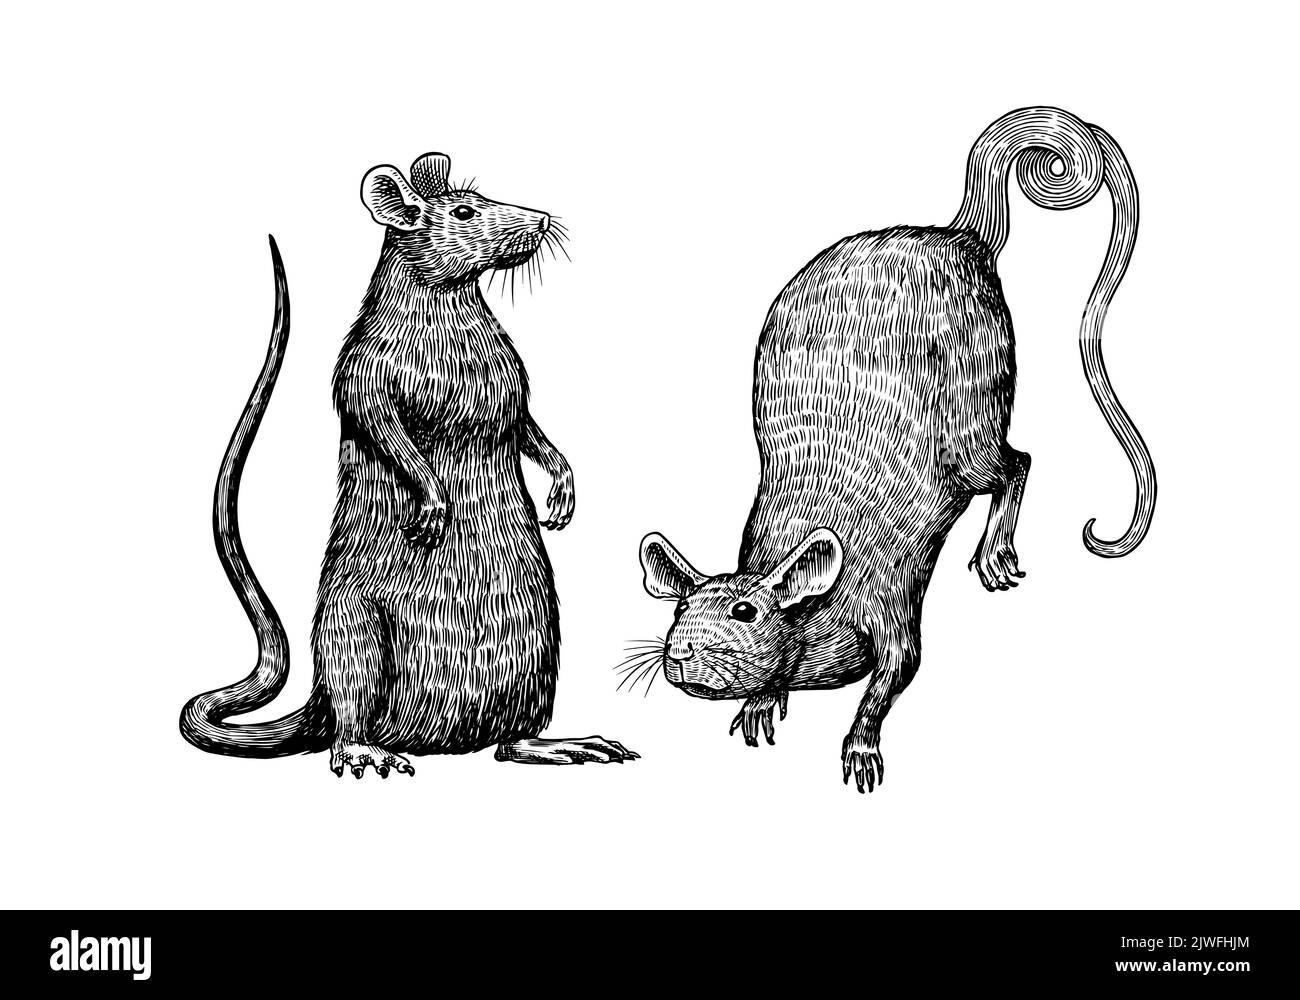 Rat or mouse. Graphic wild animal. Hand drawn vintage sketch. Engraved grunge elements. Stock Vector